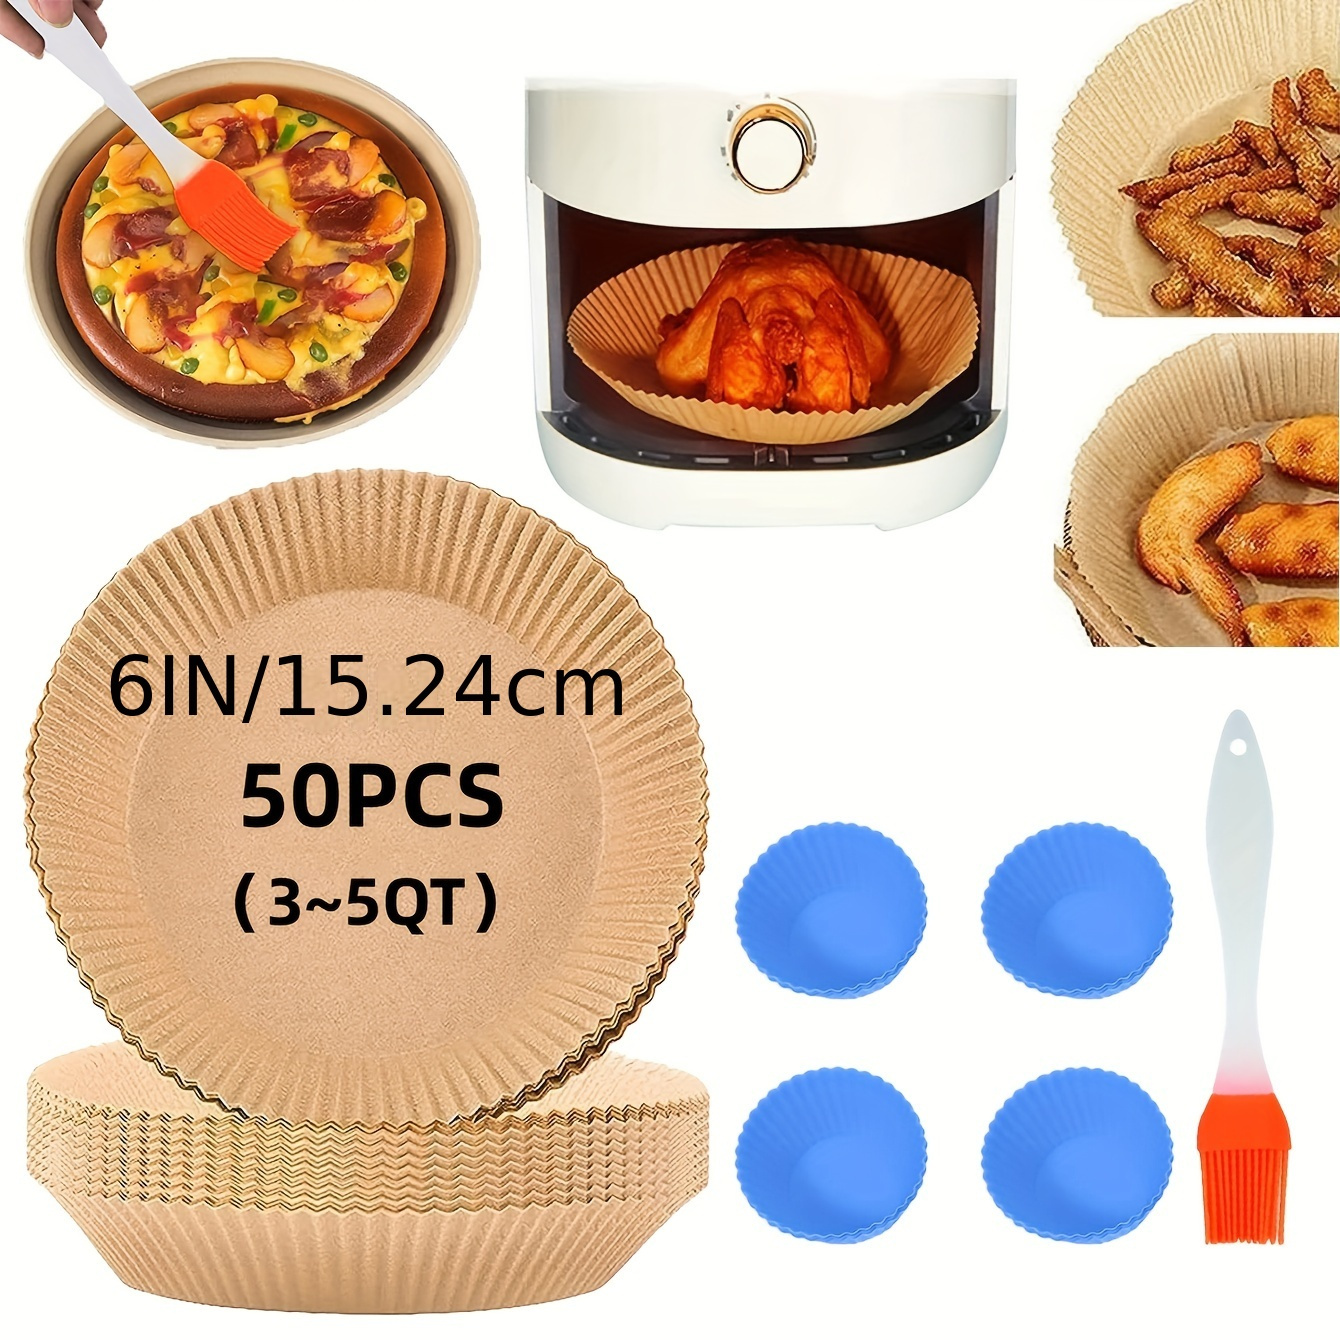 https://img.kwcdn.com/product/parchment-paper-liners/d69d2f15w98k18-e71b1fc9/fancyalgo/toaster-api/toaster-processor-image-cm2in/14ce8f32-8a9a-11ee-babb-0a580a6810bb.jpg